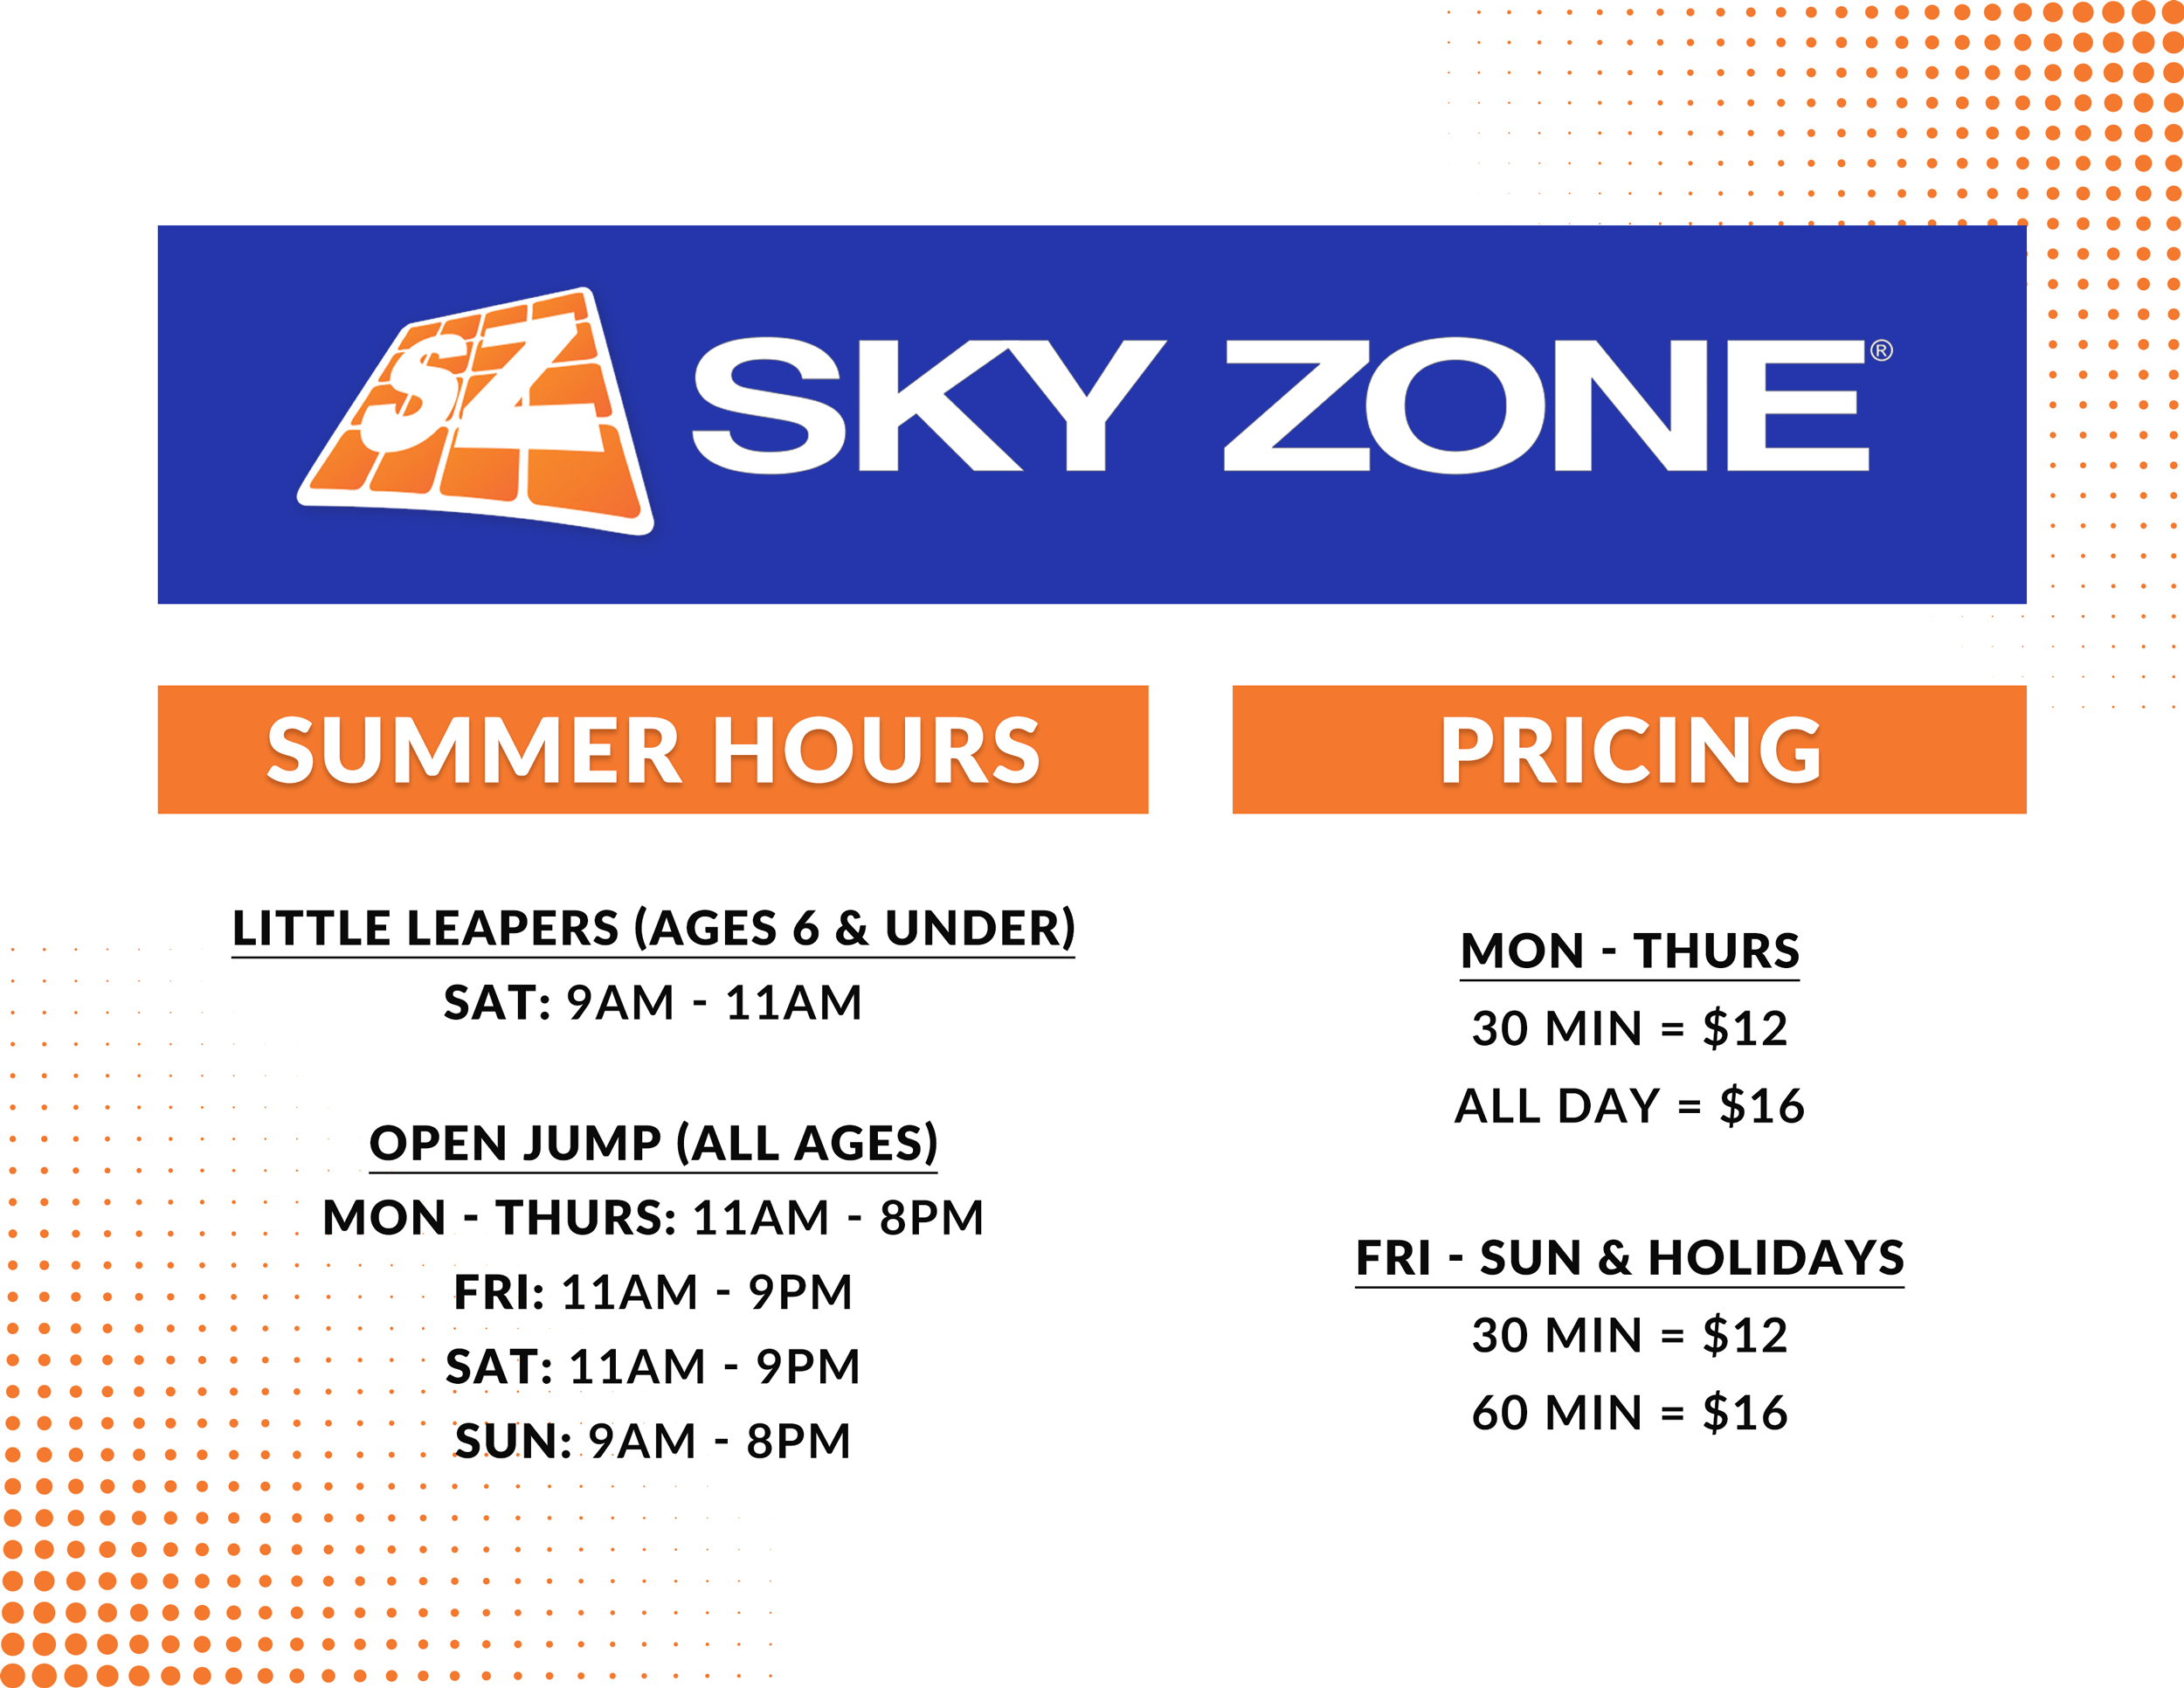 Sky Zone Summer Hours Prices Desk Flyer